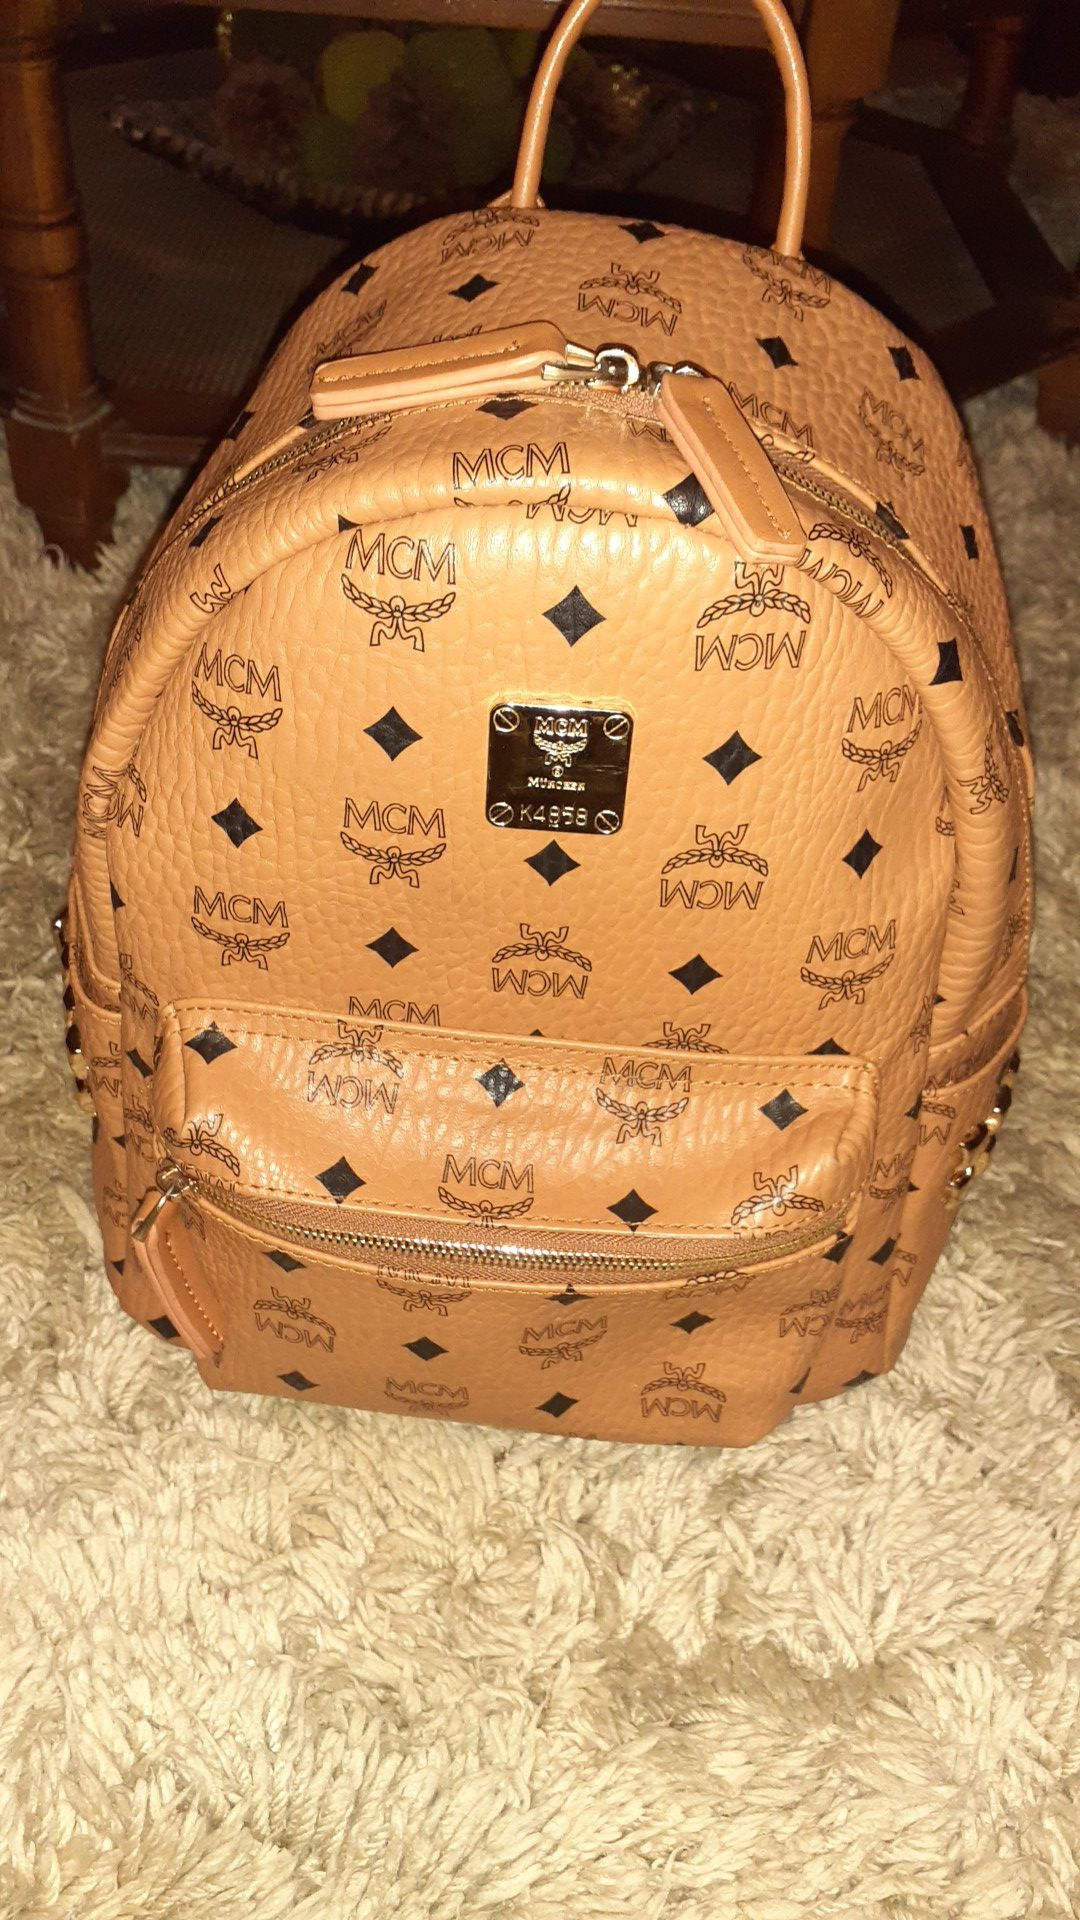 Mcm small size book bag